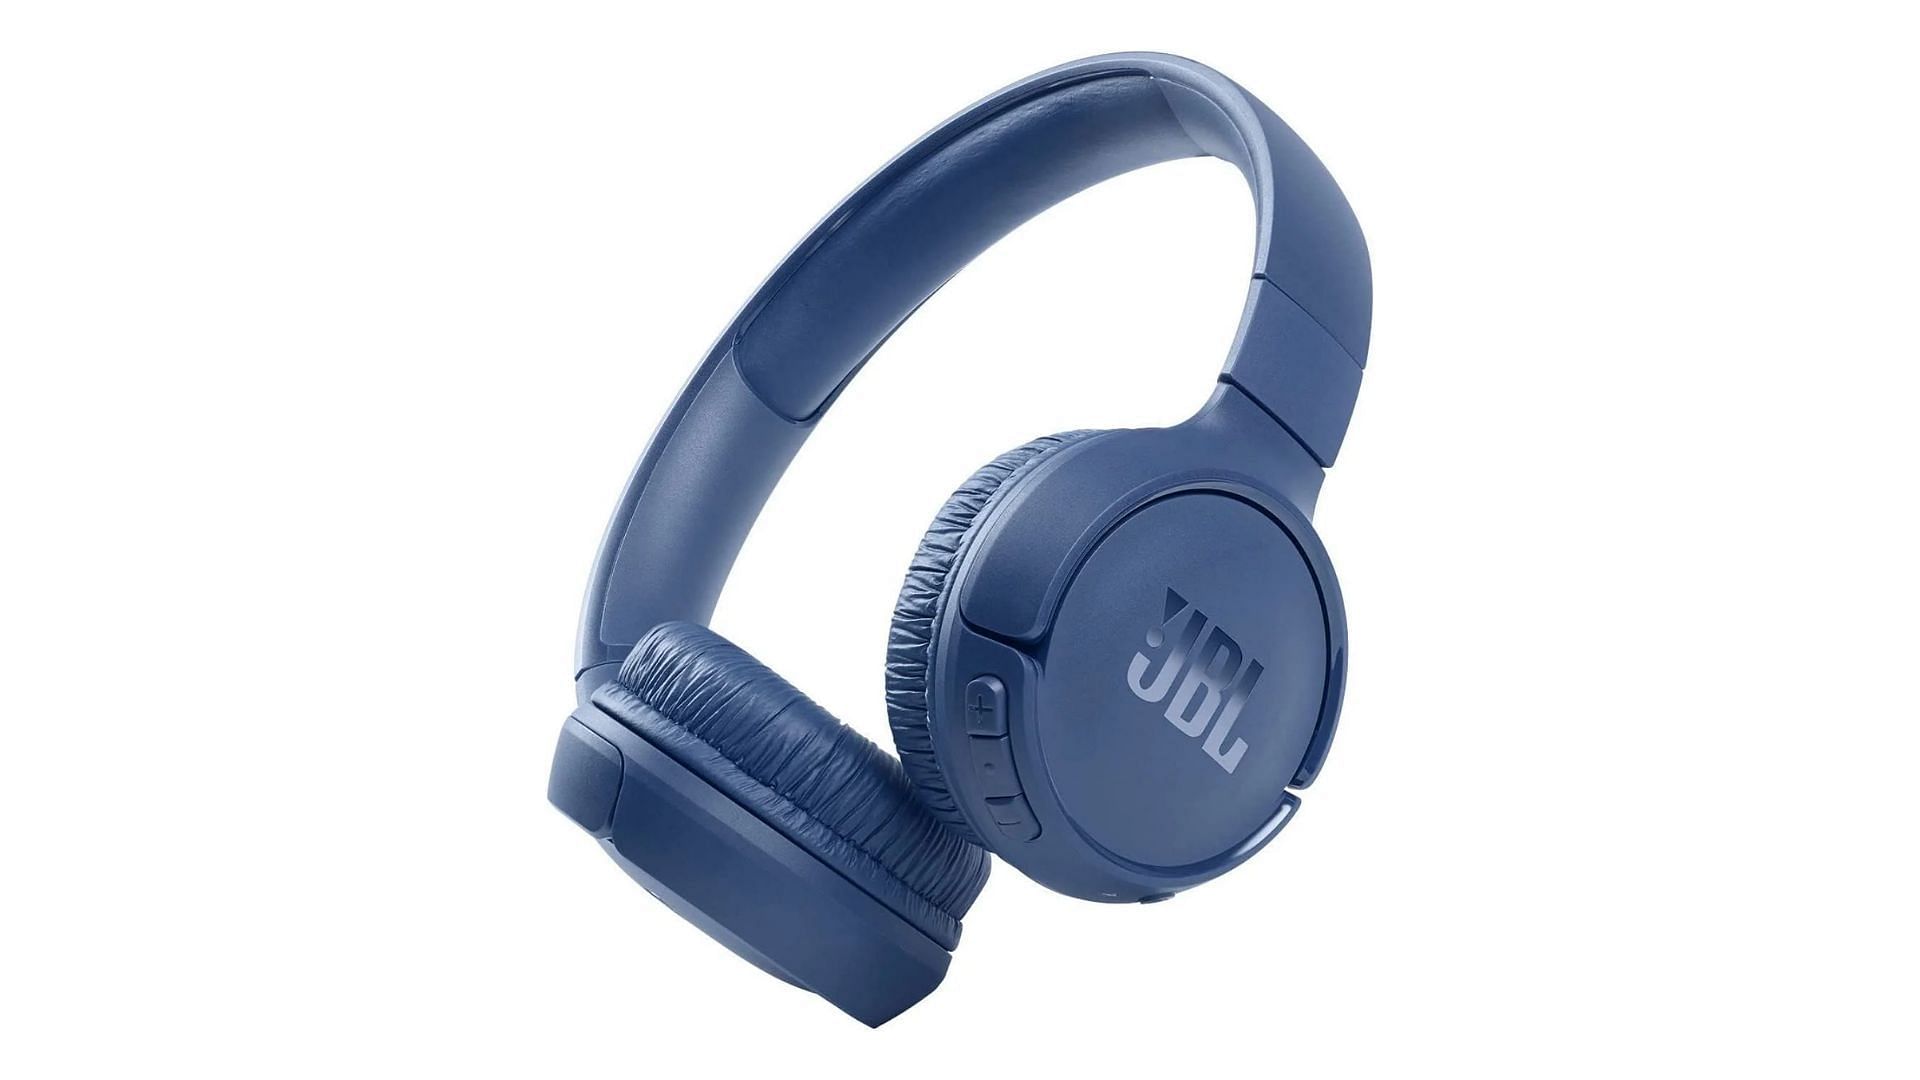 The JBL Tune 510BT wireless on-ear headphones with pure bass sound (Image via Amazon)